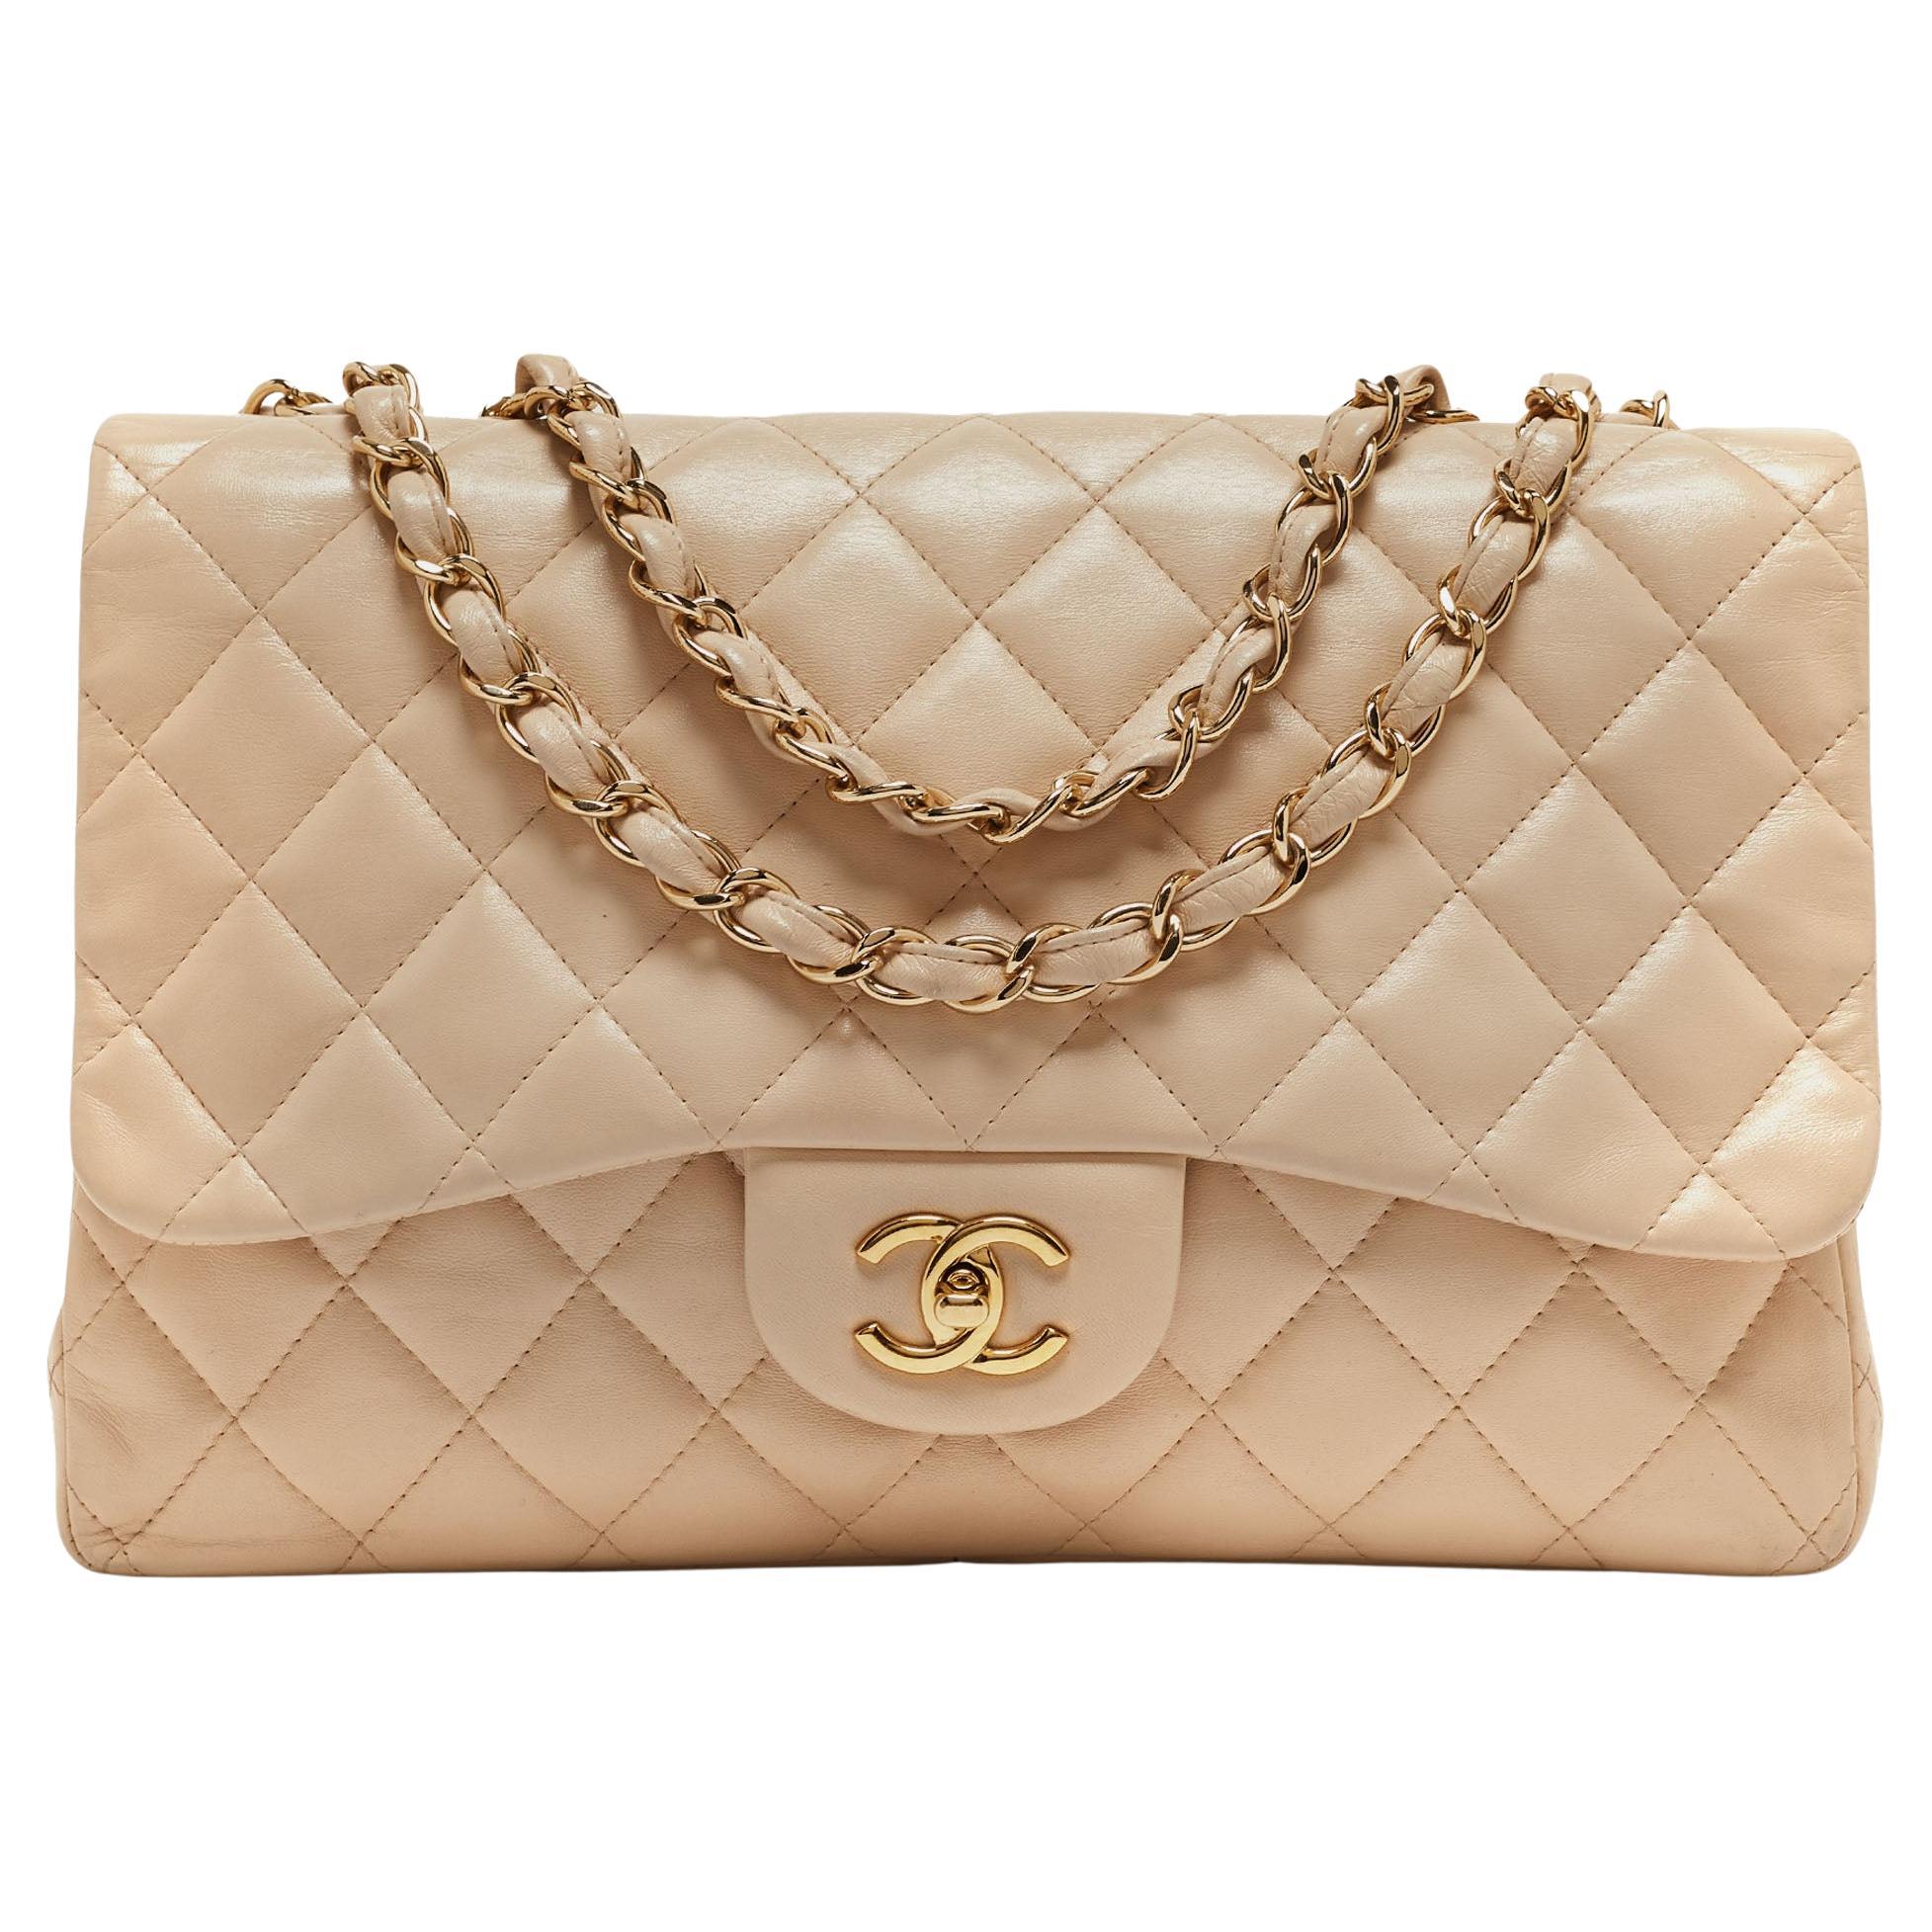 Chanel Beige Quilted Leather Jumbo Classic Single Flap Bag